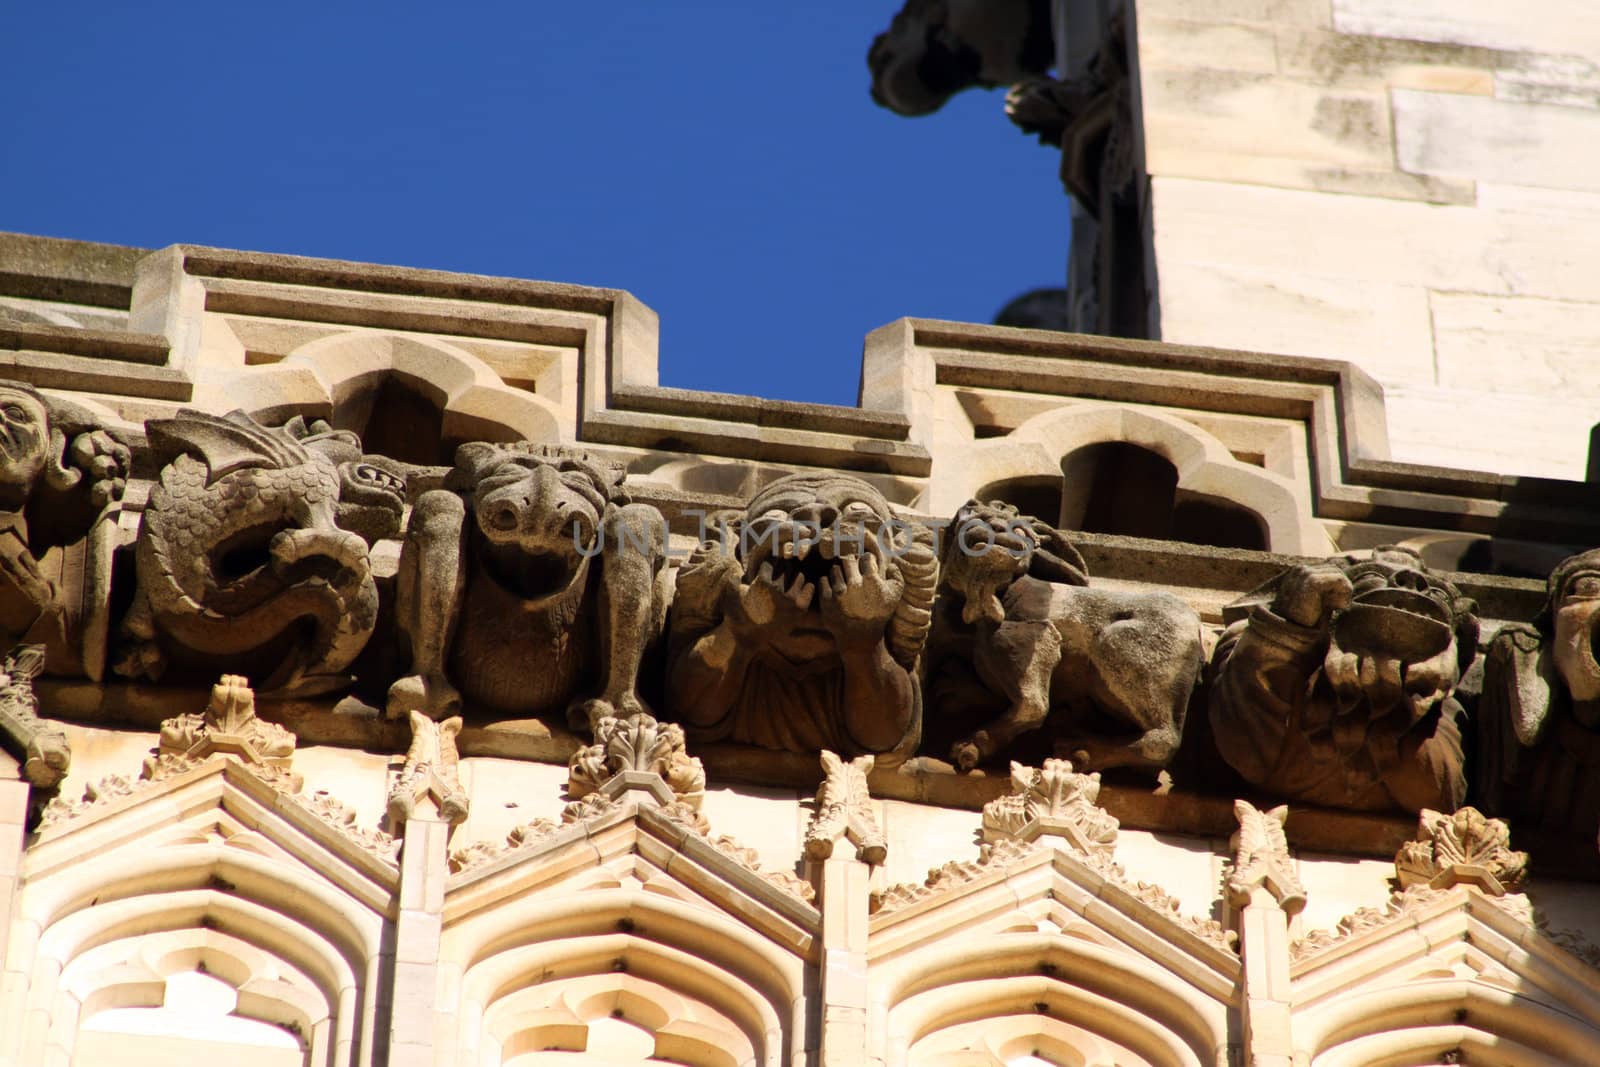 Five gargoyles found on the side of Chester Cathedral